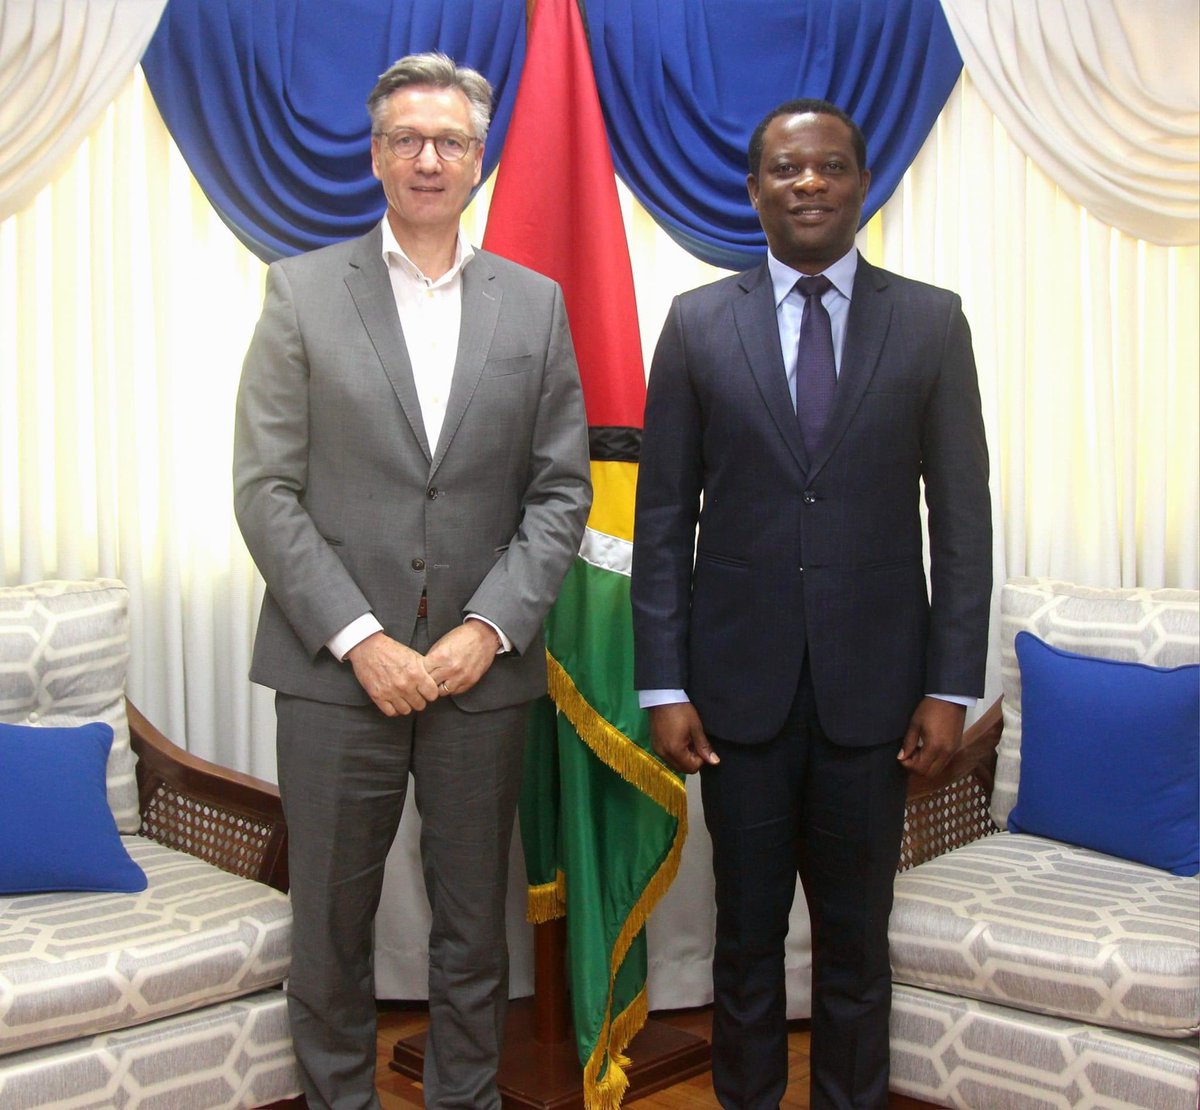 Foreign Minister Hugh Todd received a courtesy call from Ambassador Rene Van Nes, Head of EU Delegation in Guyana during which they exchanged views on issues of bilateral and multilateral importance including the Guyana-EU Political Dialogue proposed to be held in December,2023